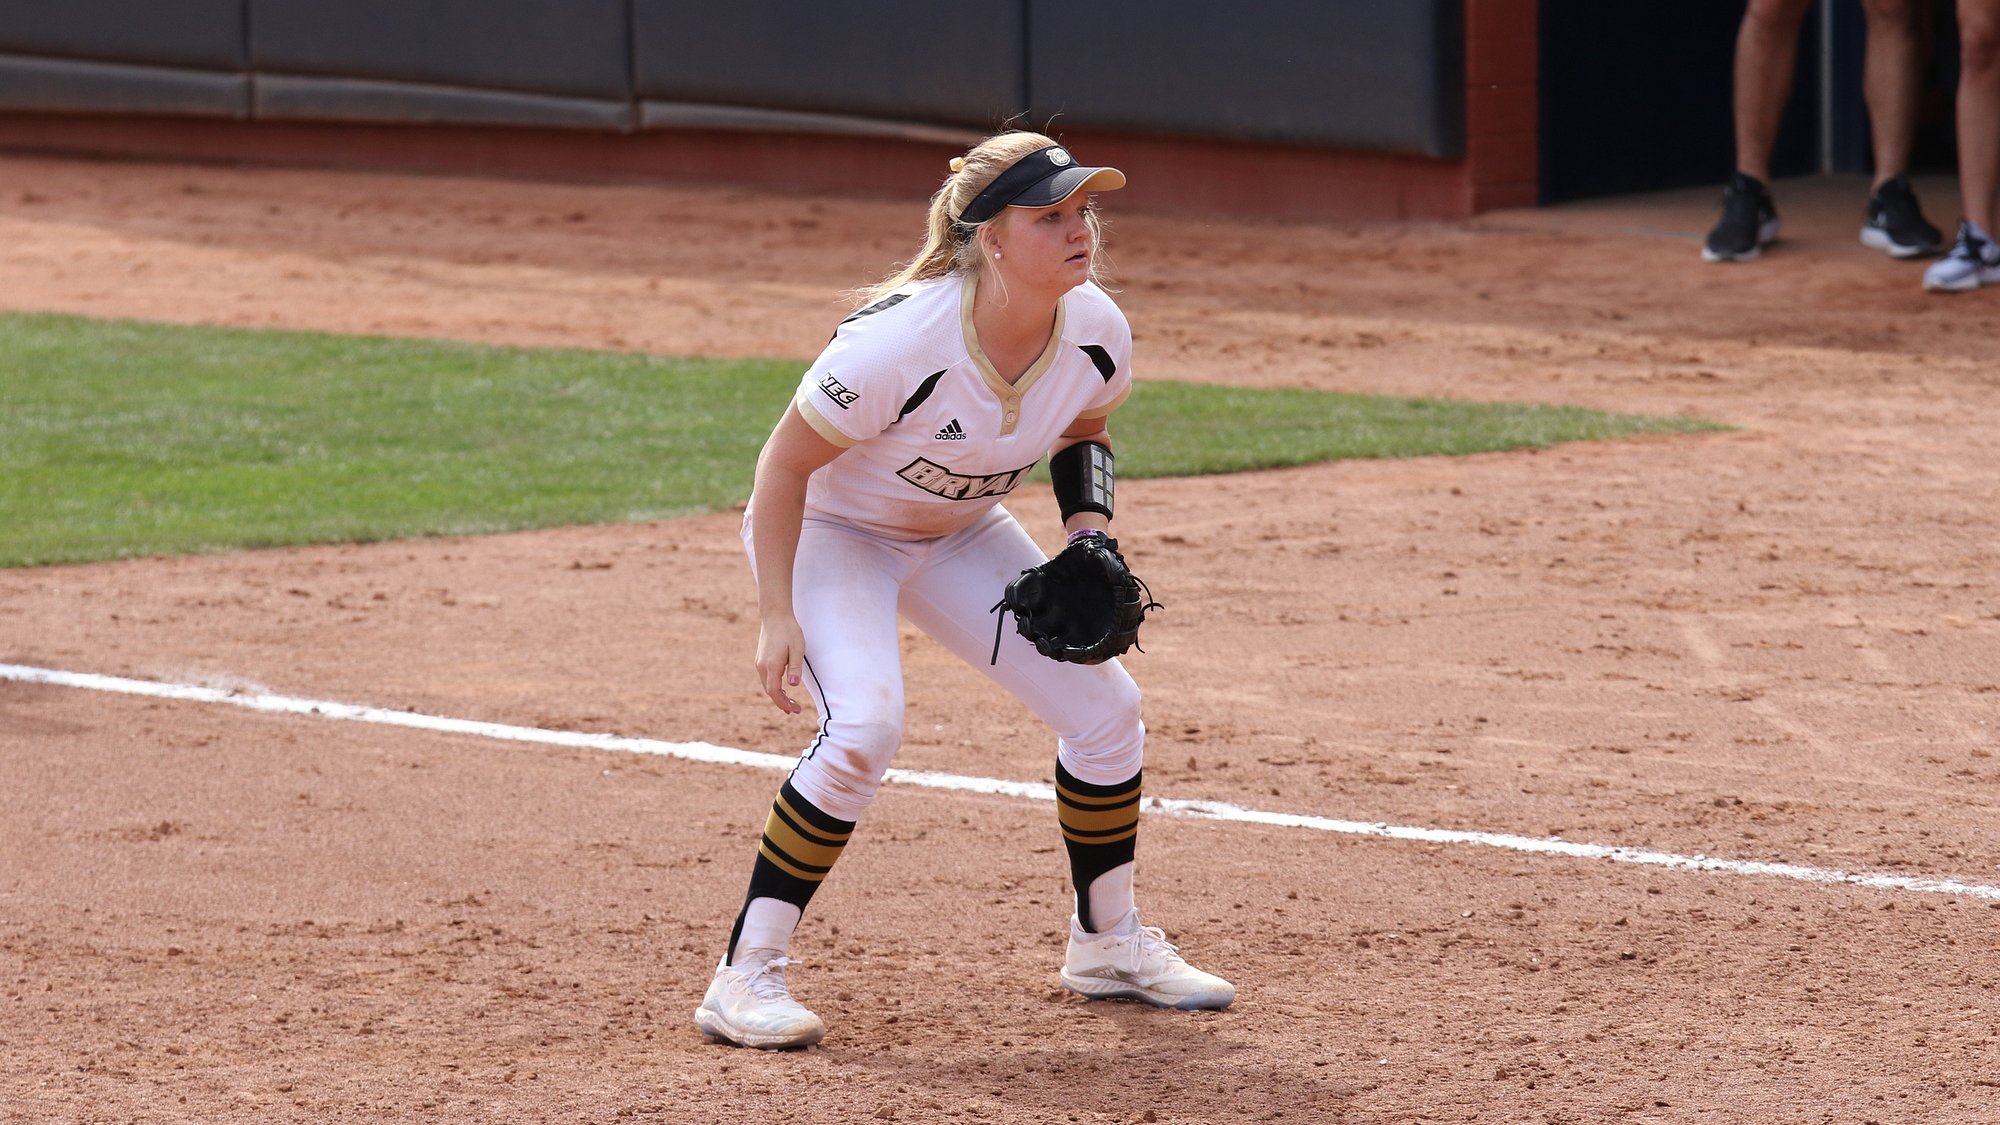 Bryant to face Brown for mid-week DH in Providence